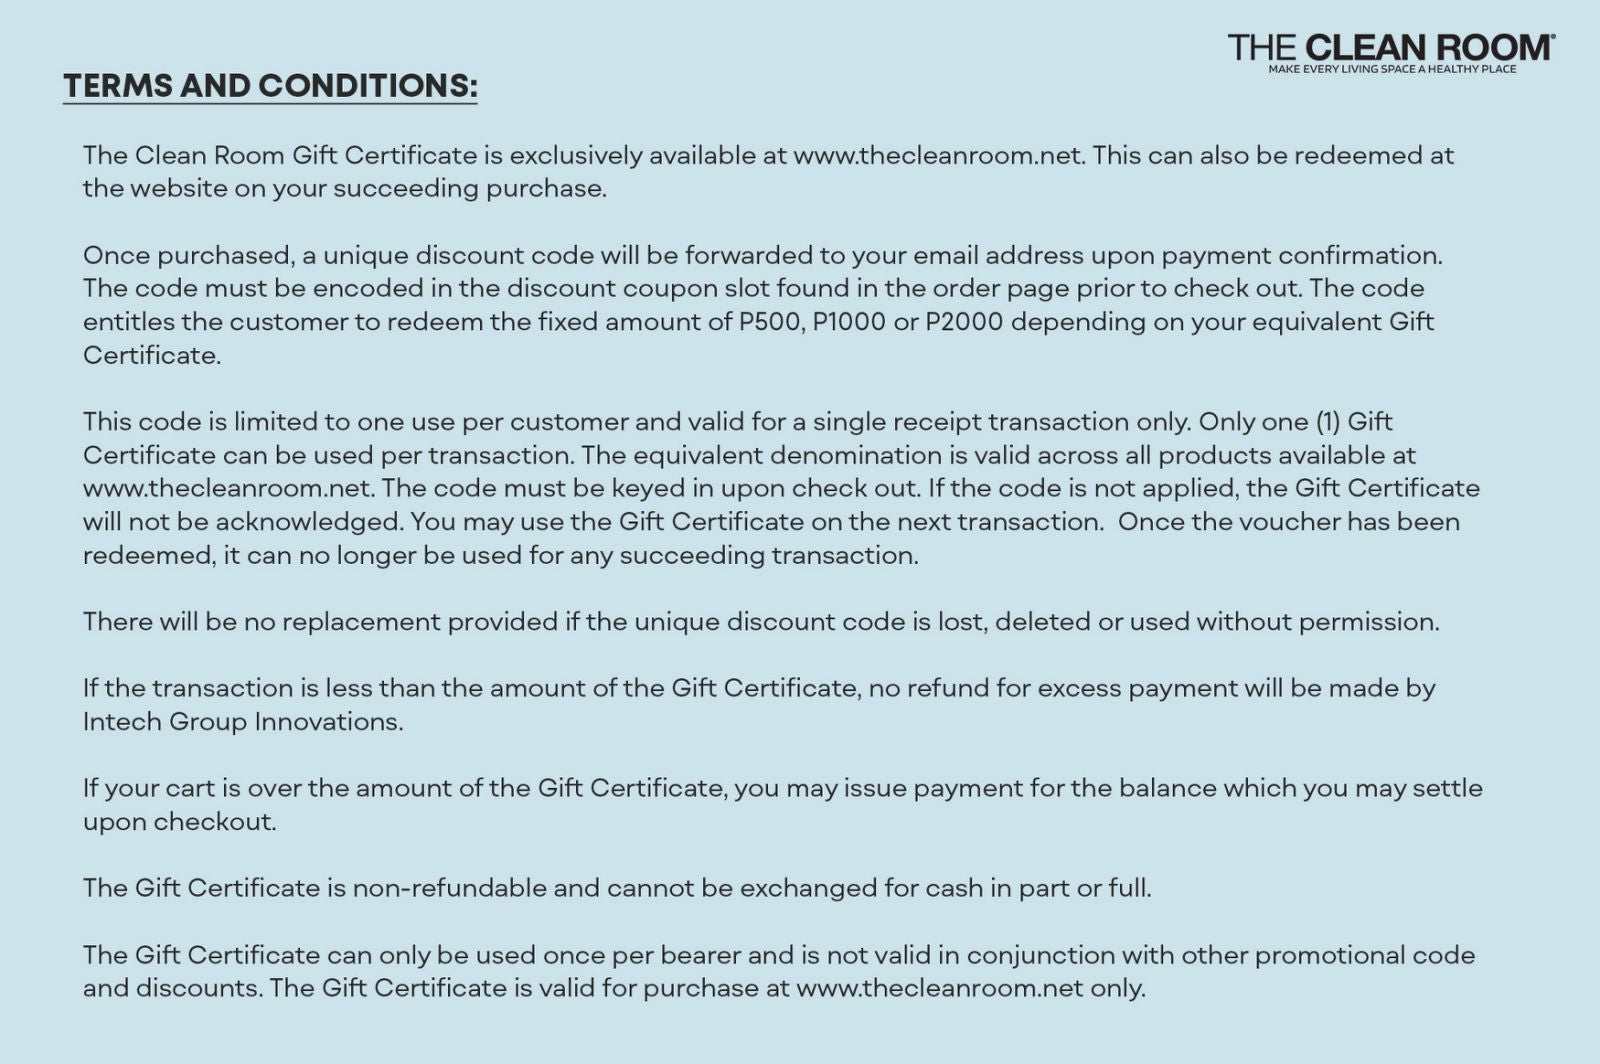 Terms and Conditions for BigCommerce - TermsFeed